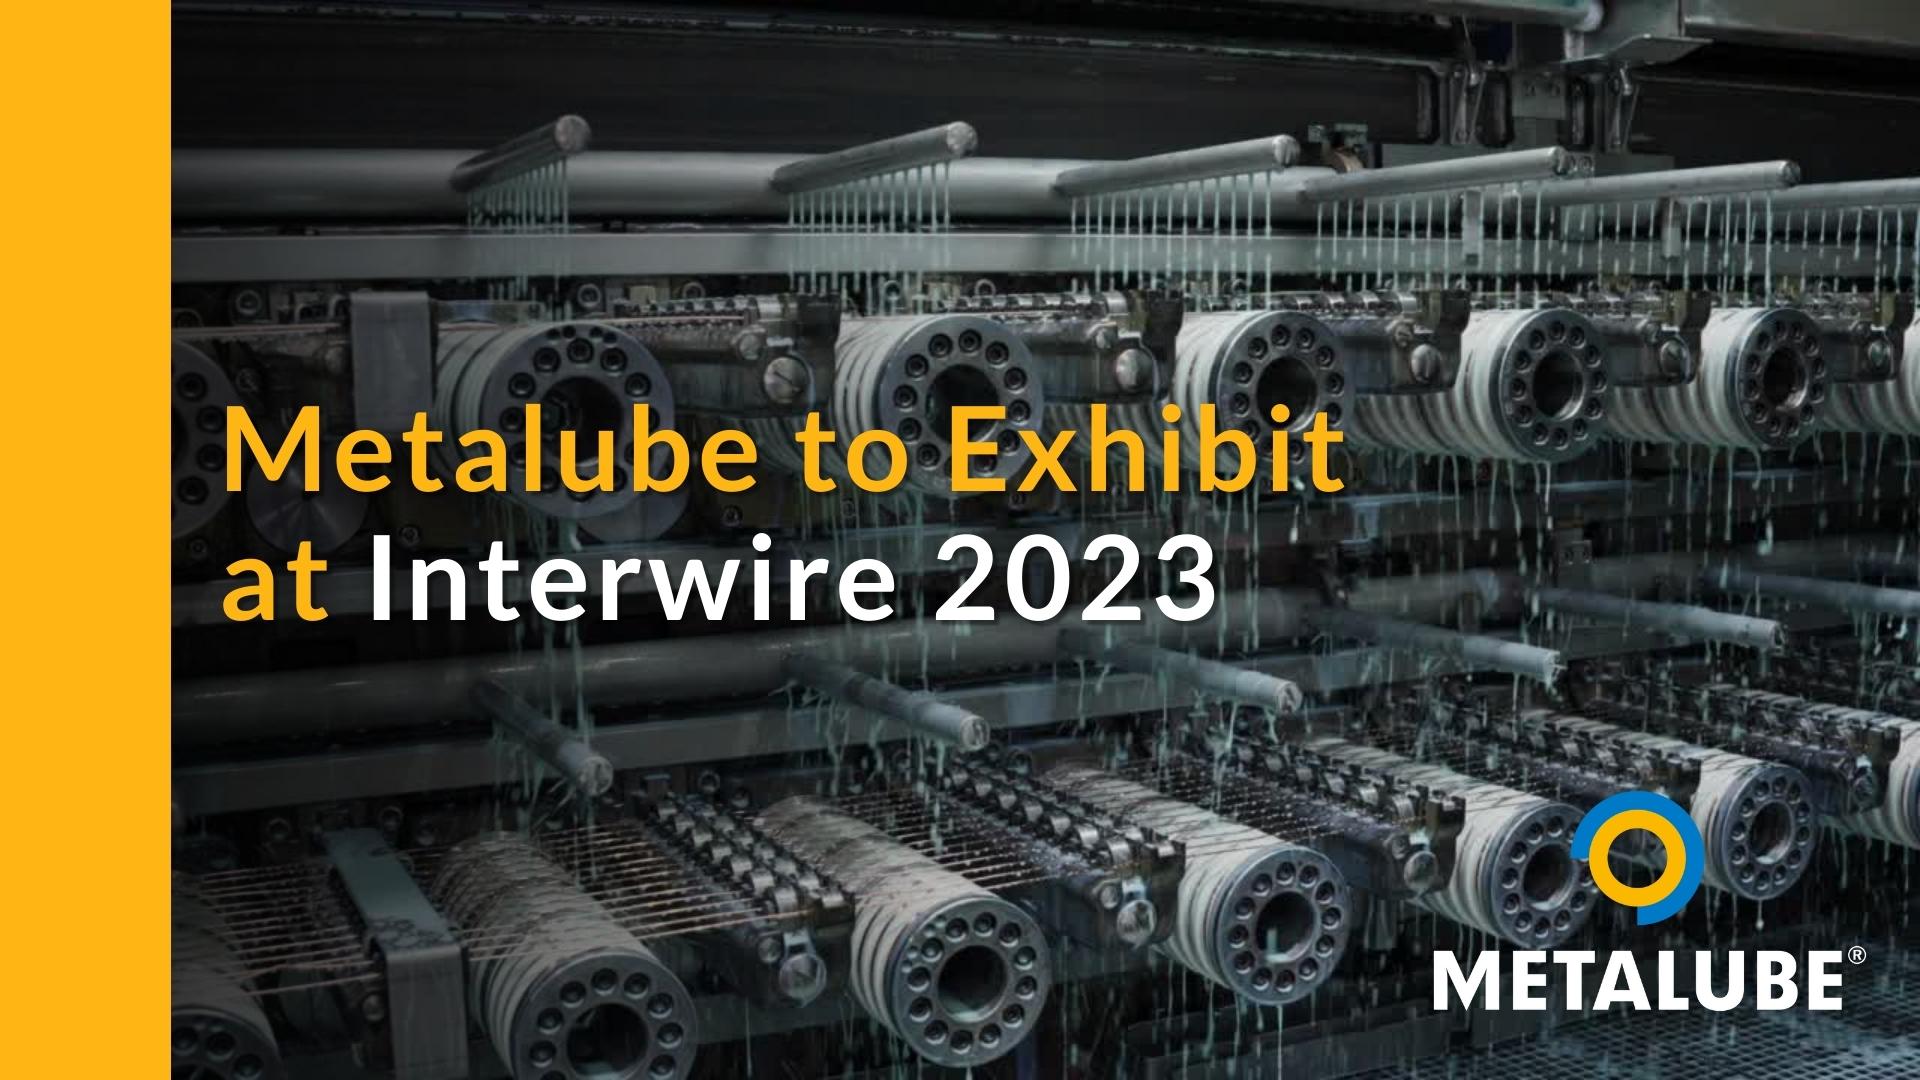 METALUBE Joins Blachford at INTERWIRE 2023 To Showcase Full Range of High-Performance Wire Drawing Lubricants